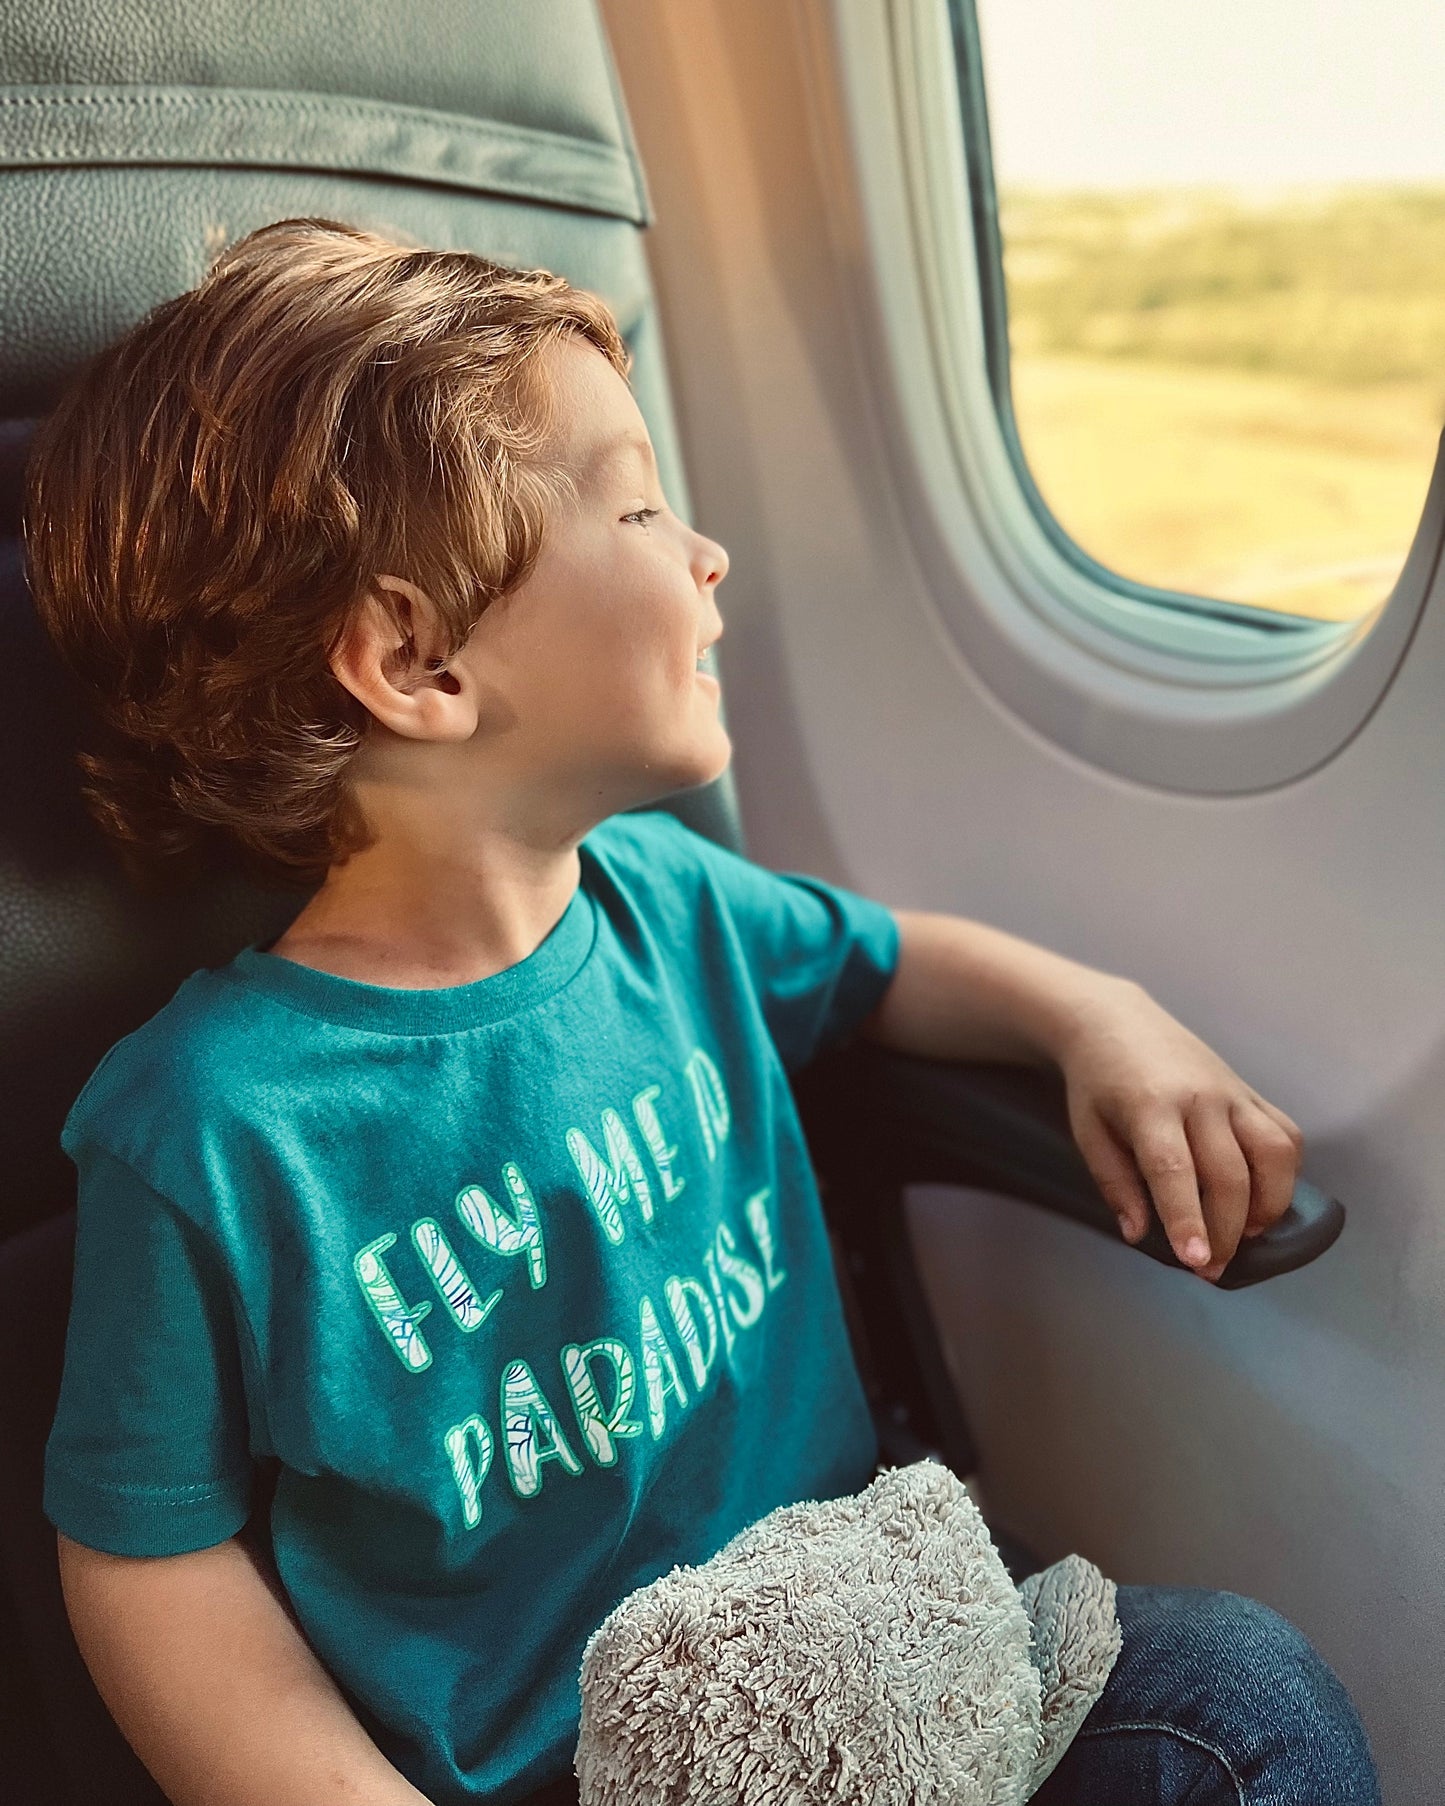 FLY ME TO PARADISE - Organic Cotton Kids Short Sleeve T Shirt - Little Mate Adventures